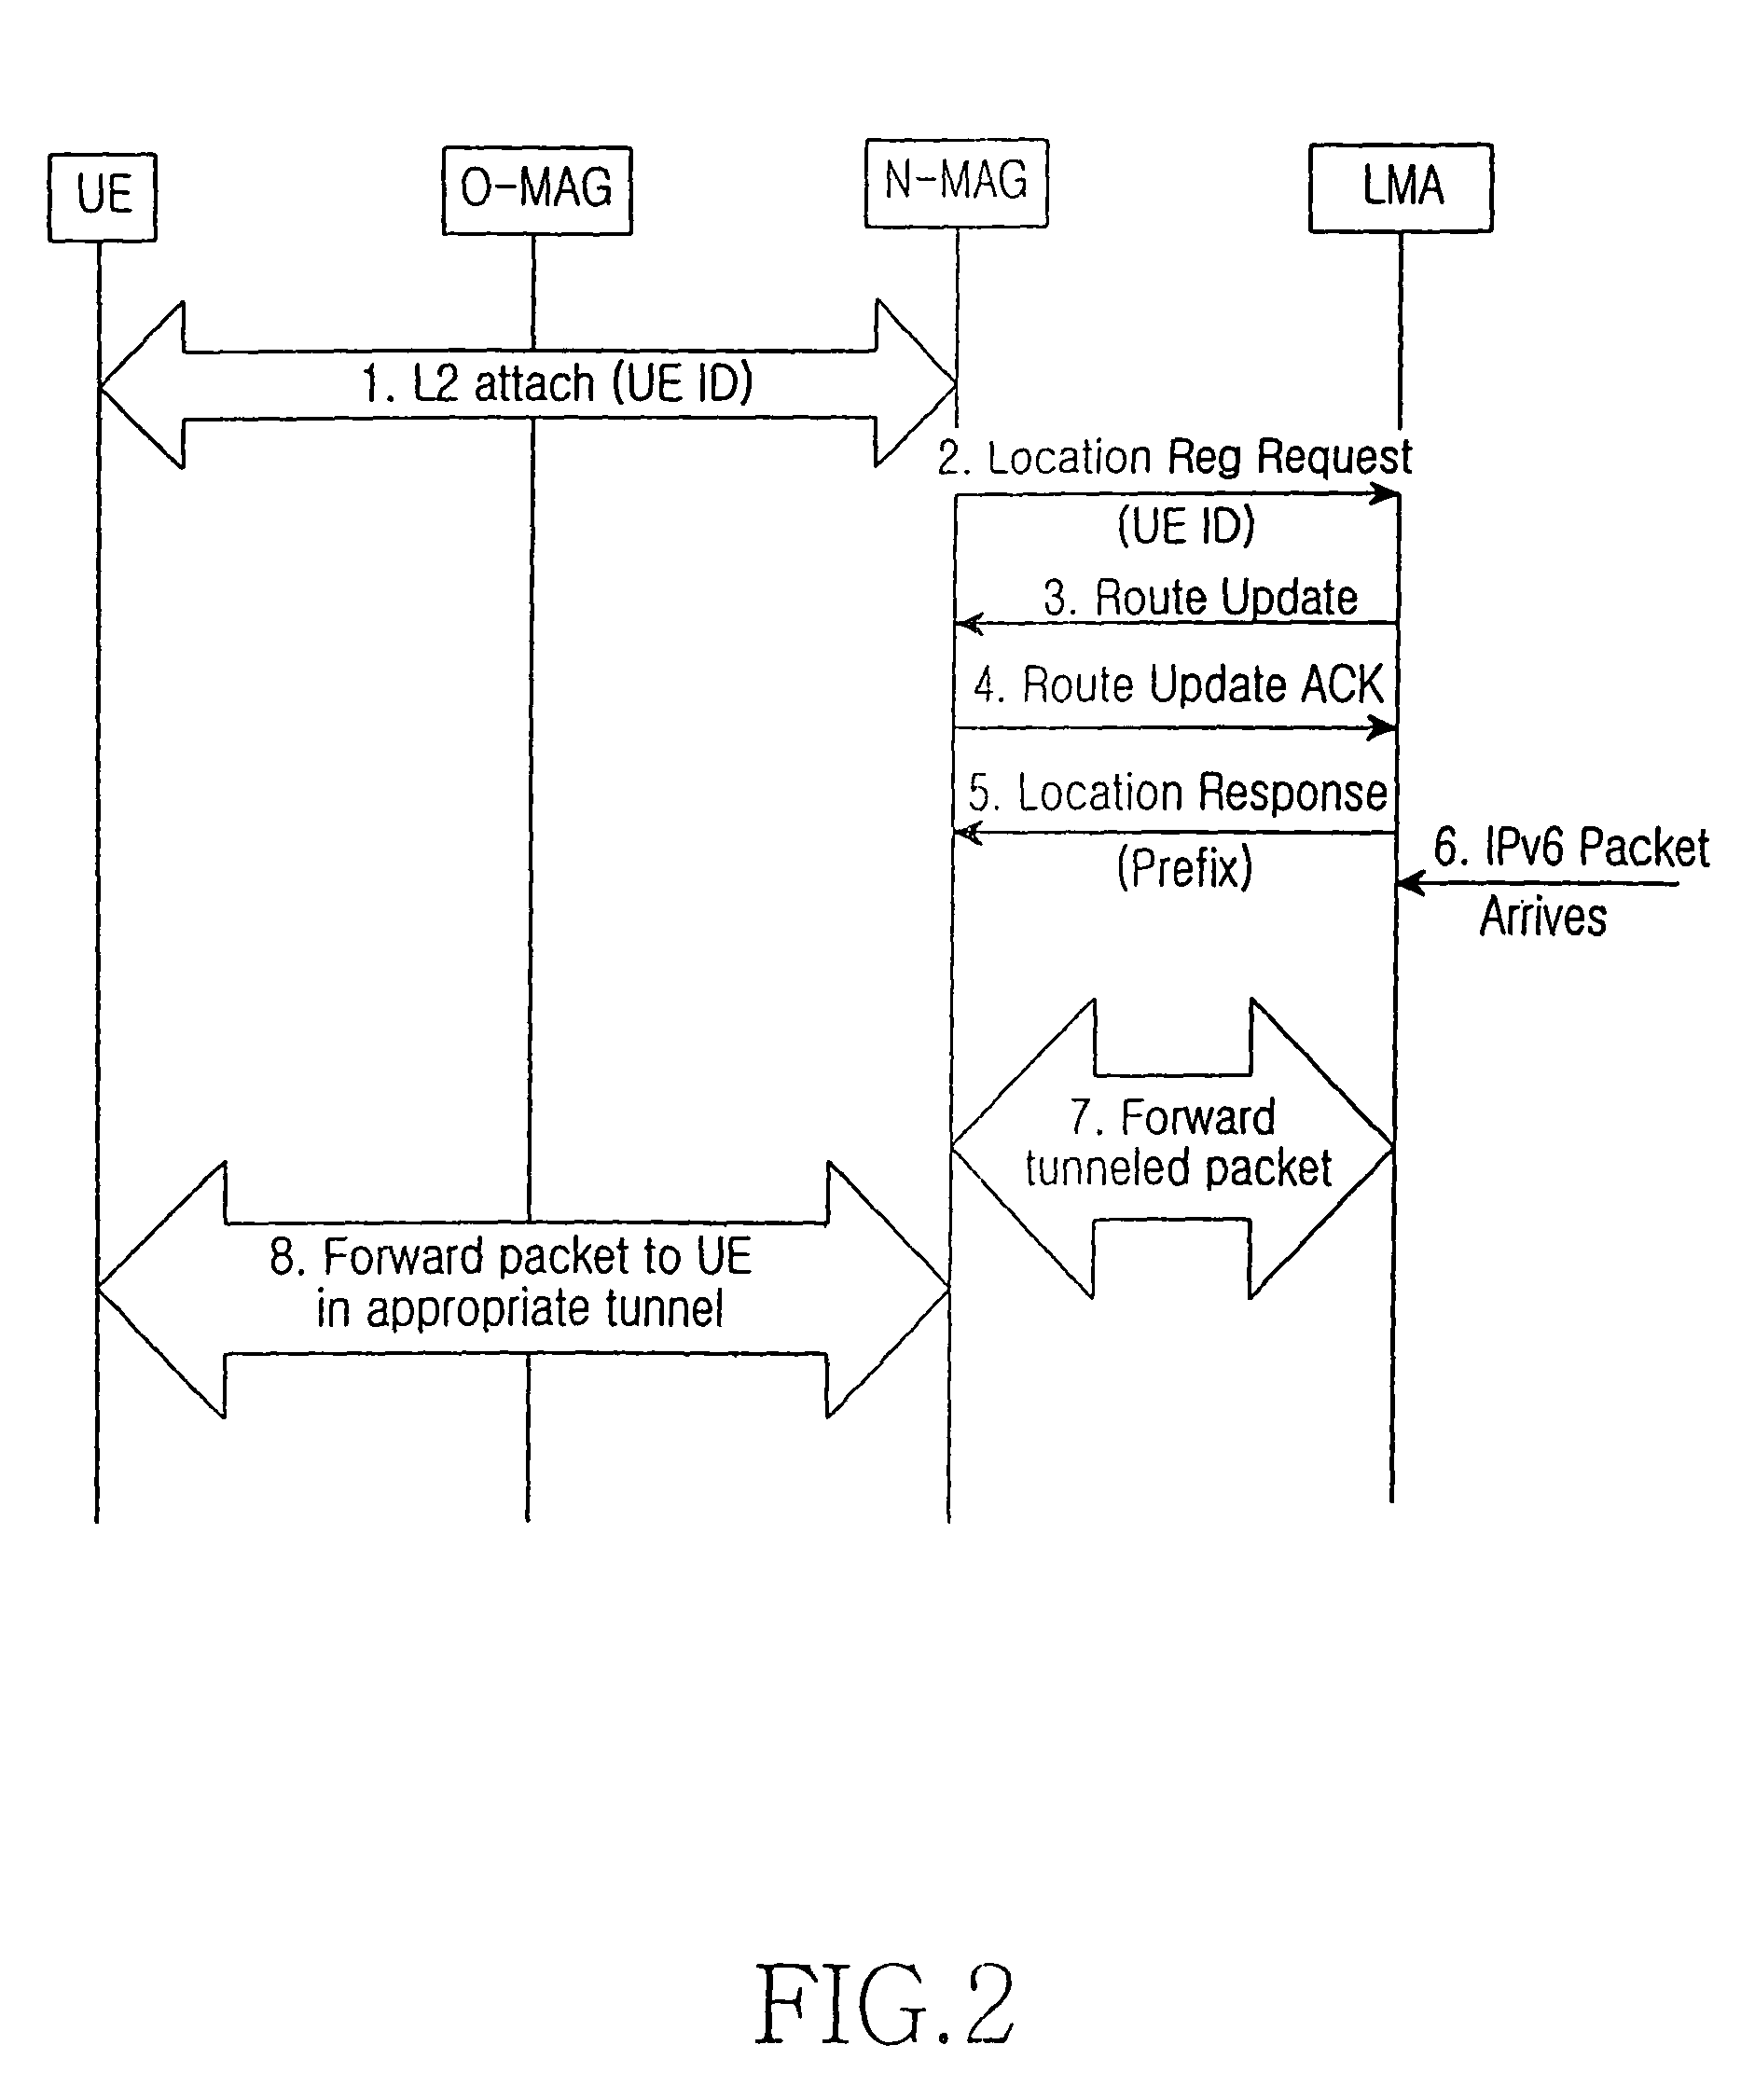 System and method to enable combination of network controlled mobility and UE controlled mobility between different IP versions